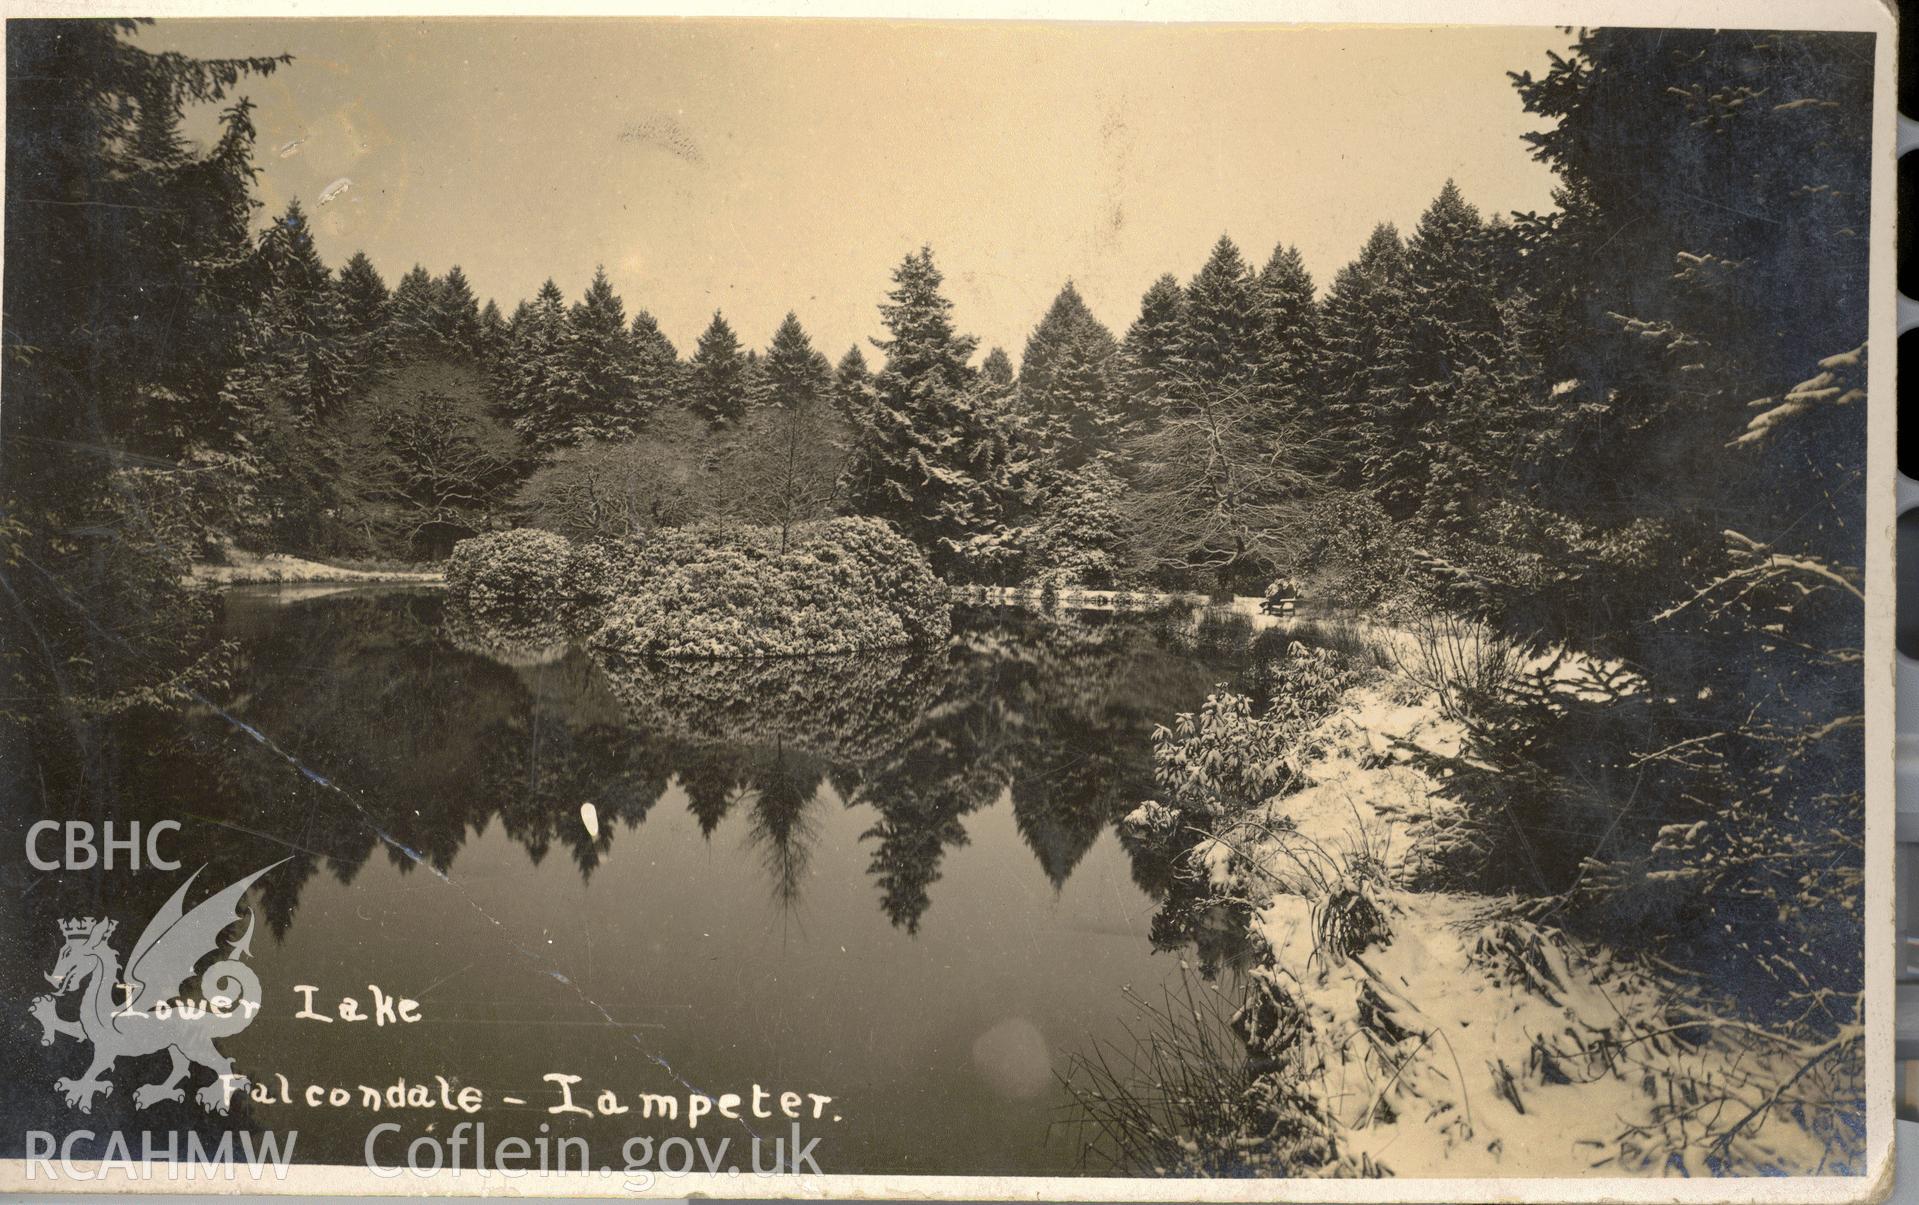 Digitised postcard image of lake, Falcondale grounds, Lampeter, J. Lemuel Rees, The central studio, Lampeter. Produced by Parks and Gardens Data Services, from an original item in the Peter Davis Collection at Parks and Gardens UK. We hold only web-resolution images of this collection, suitable for viewing on screen and for research purposes only. We do not hold the original images, or publication quality scans.